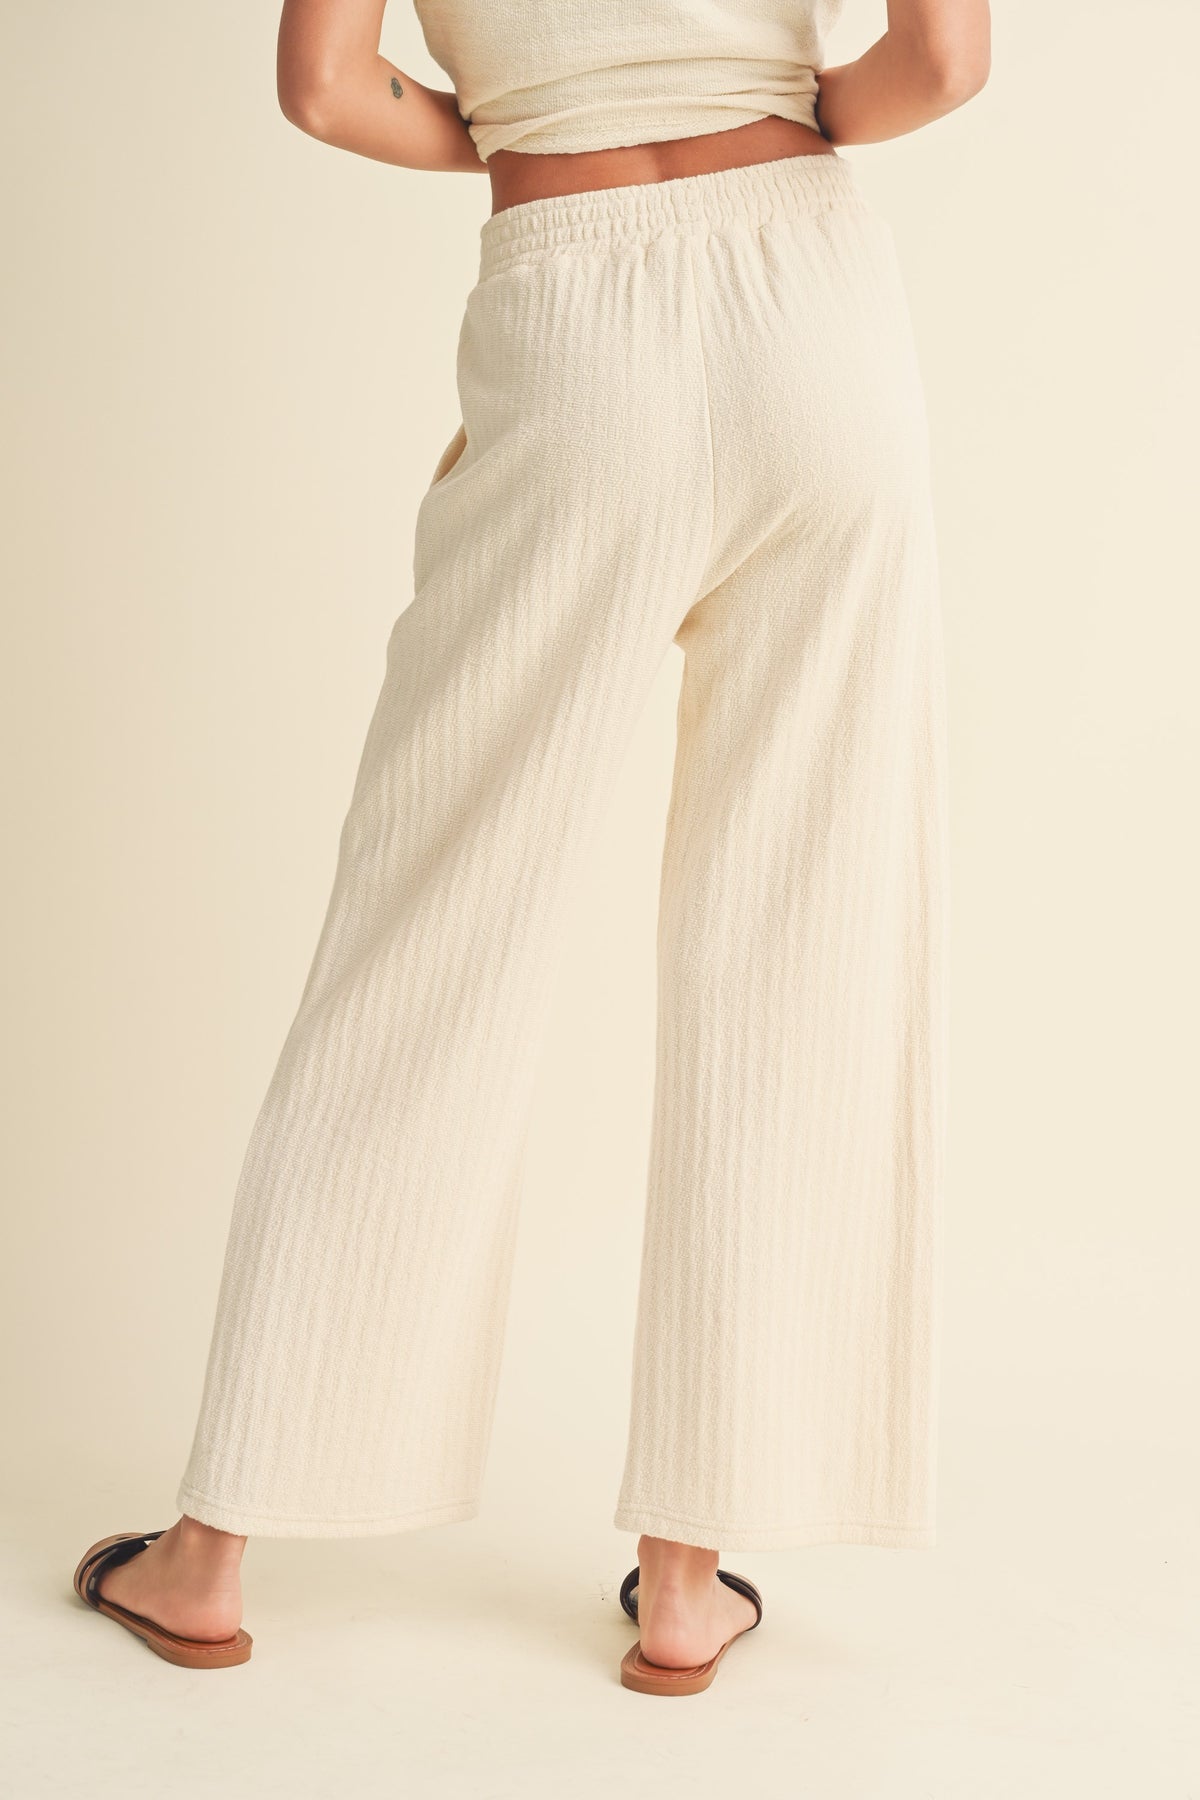 textured strip knitted pants in cream-back